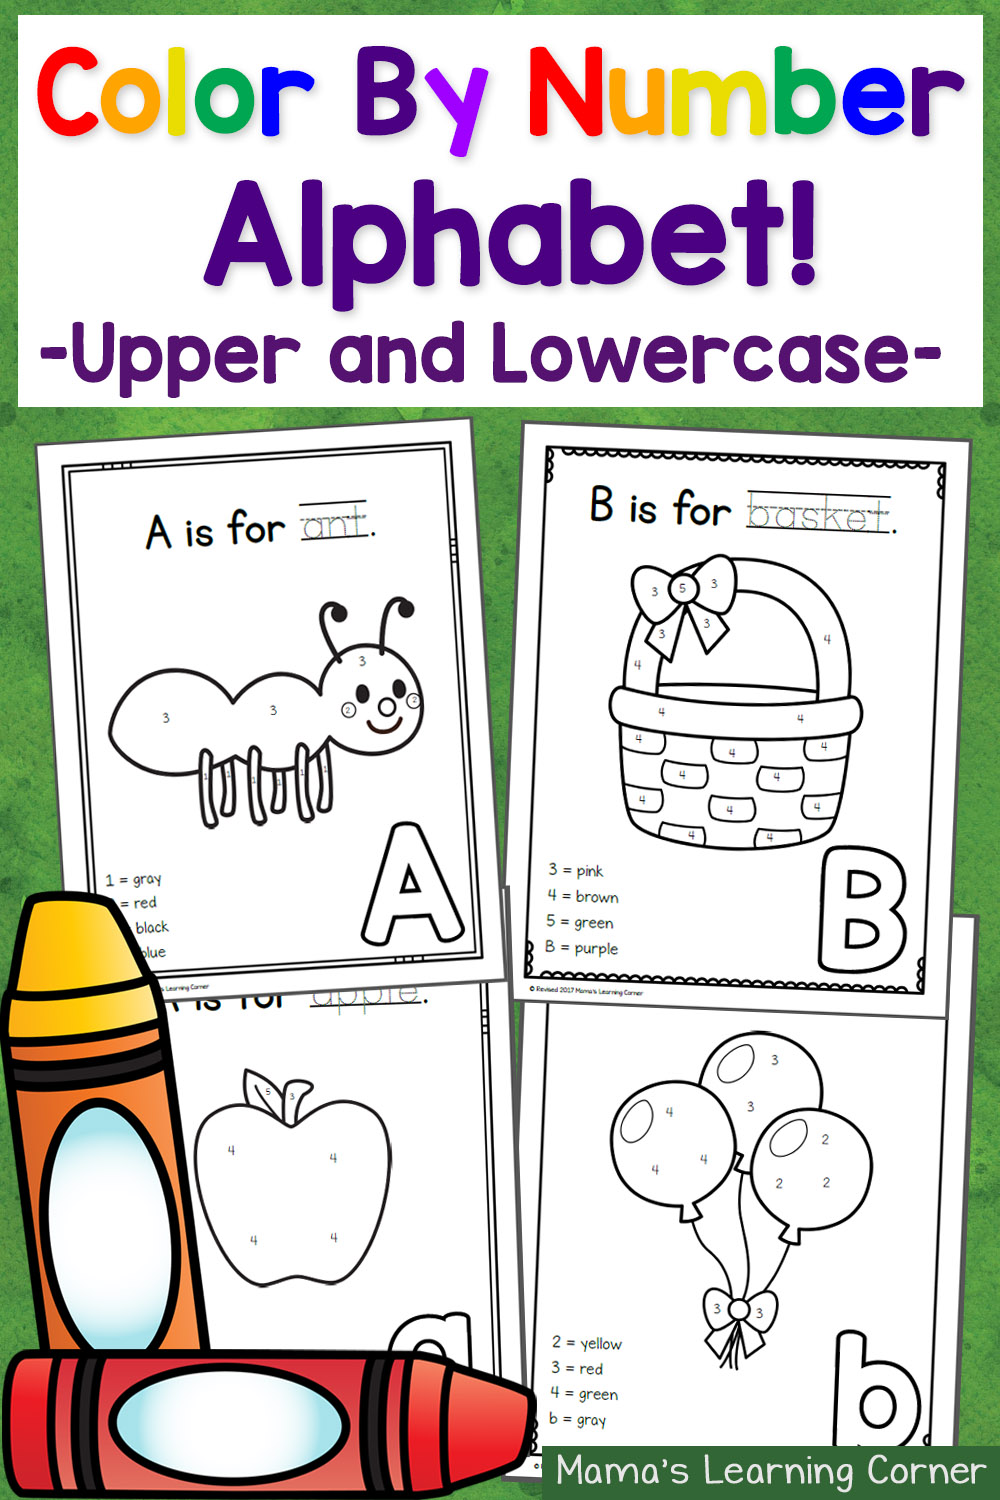 Color By Number ABCs: 50 worksheets with freebie included!